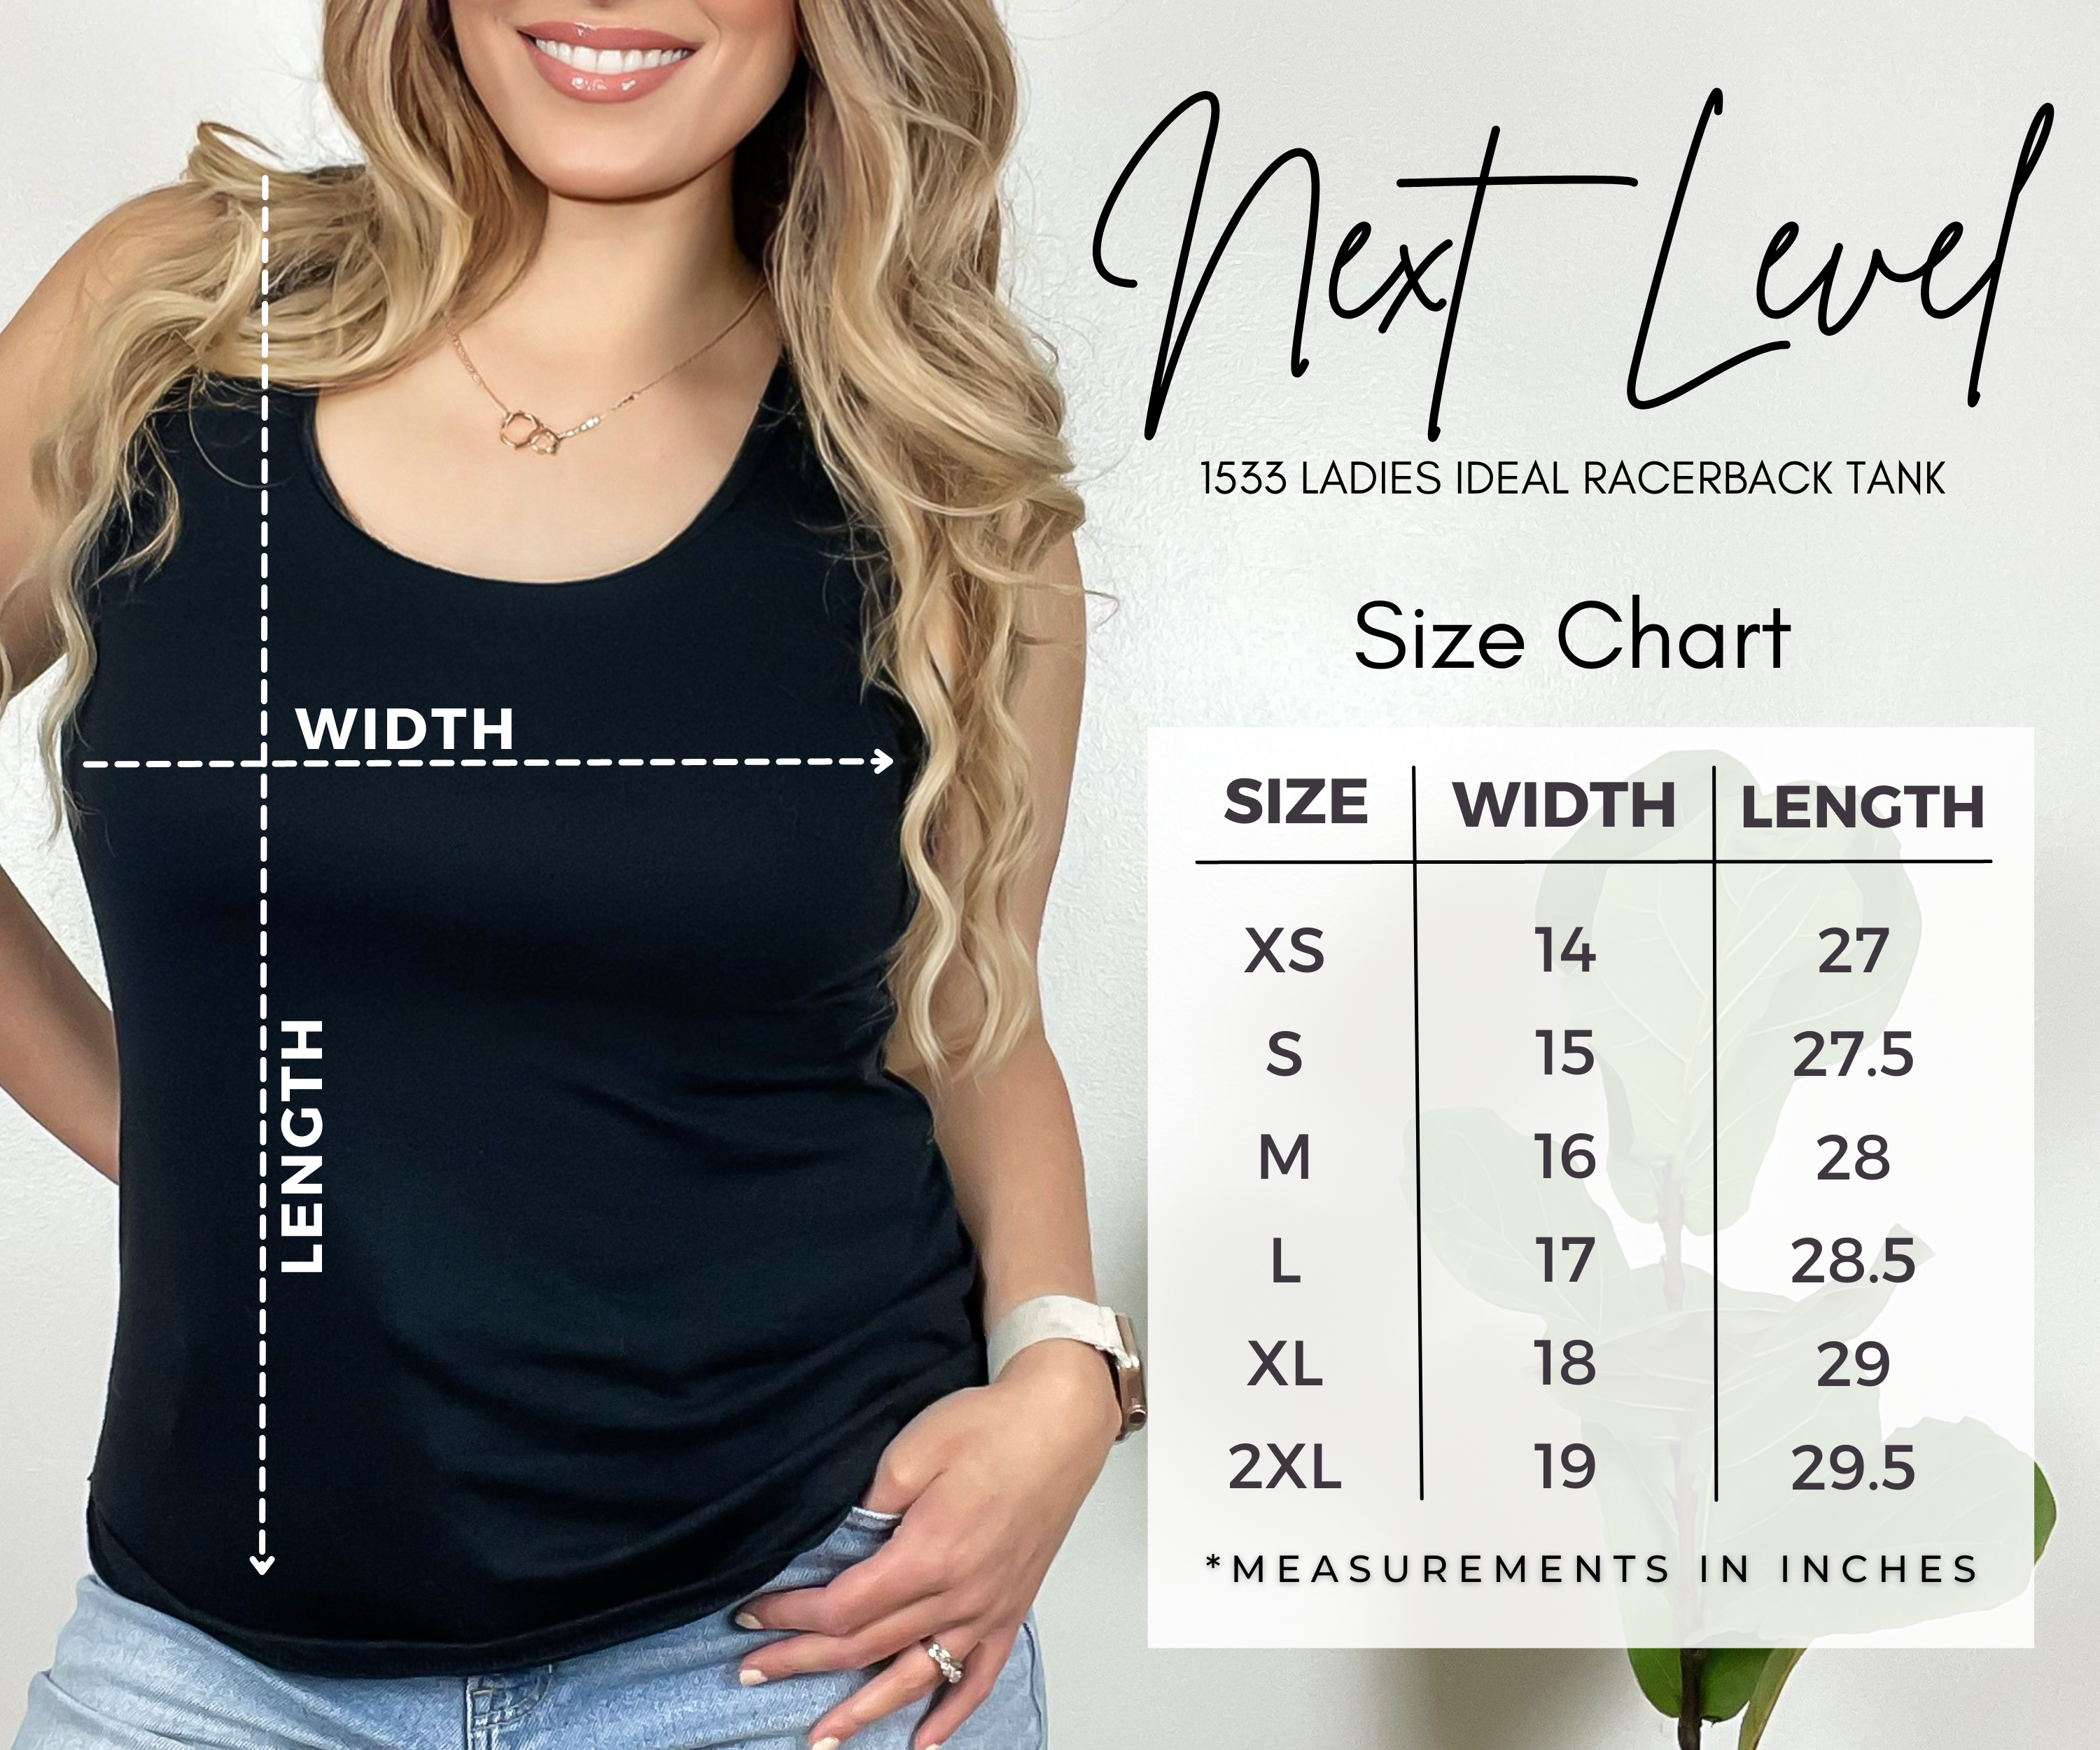 Light Gray She's Like Texas tank NextLevelSizeChart01_016e34bb-2c24-4a52-abf2-a702089b5cb9.png country-music-tank-country-girl-tank-32658 Concert & Rodeo